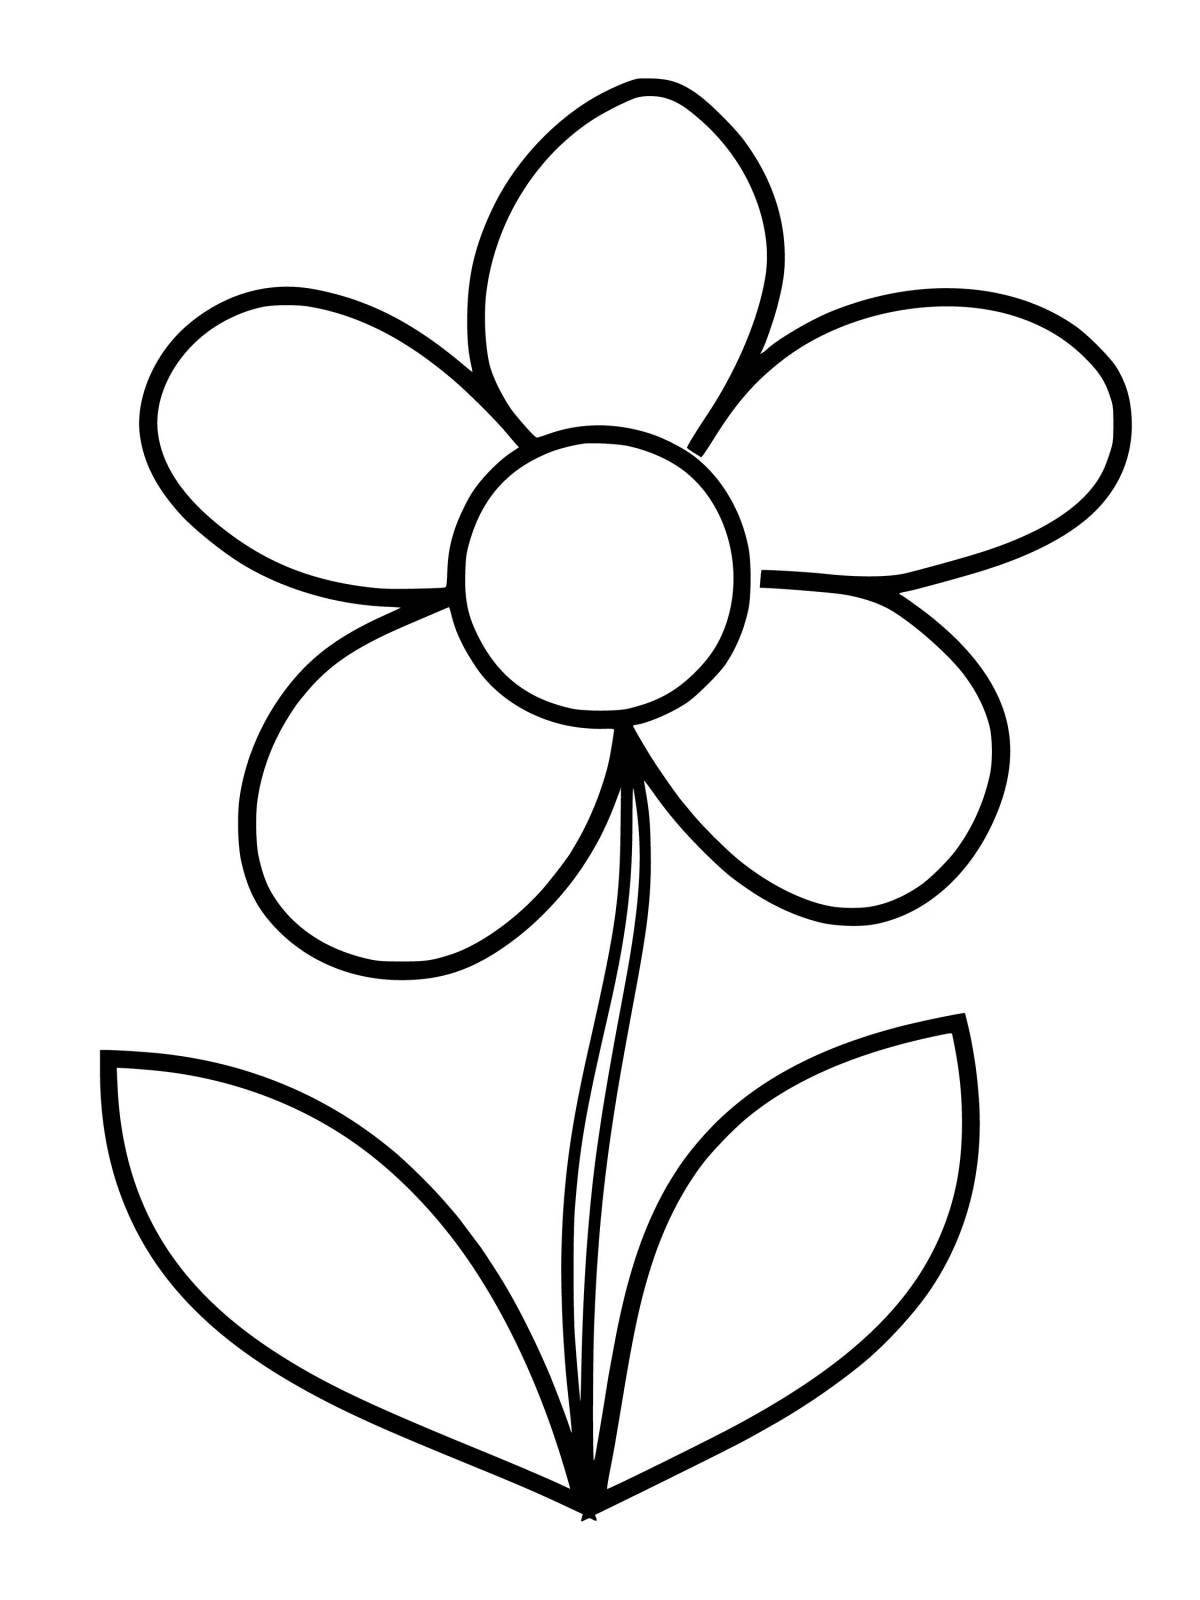 Camomile flower coloring page